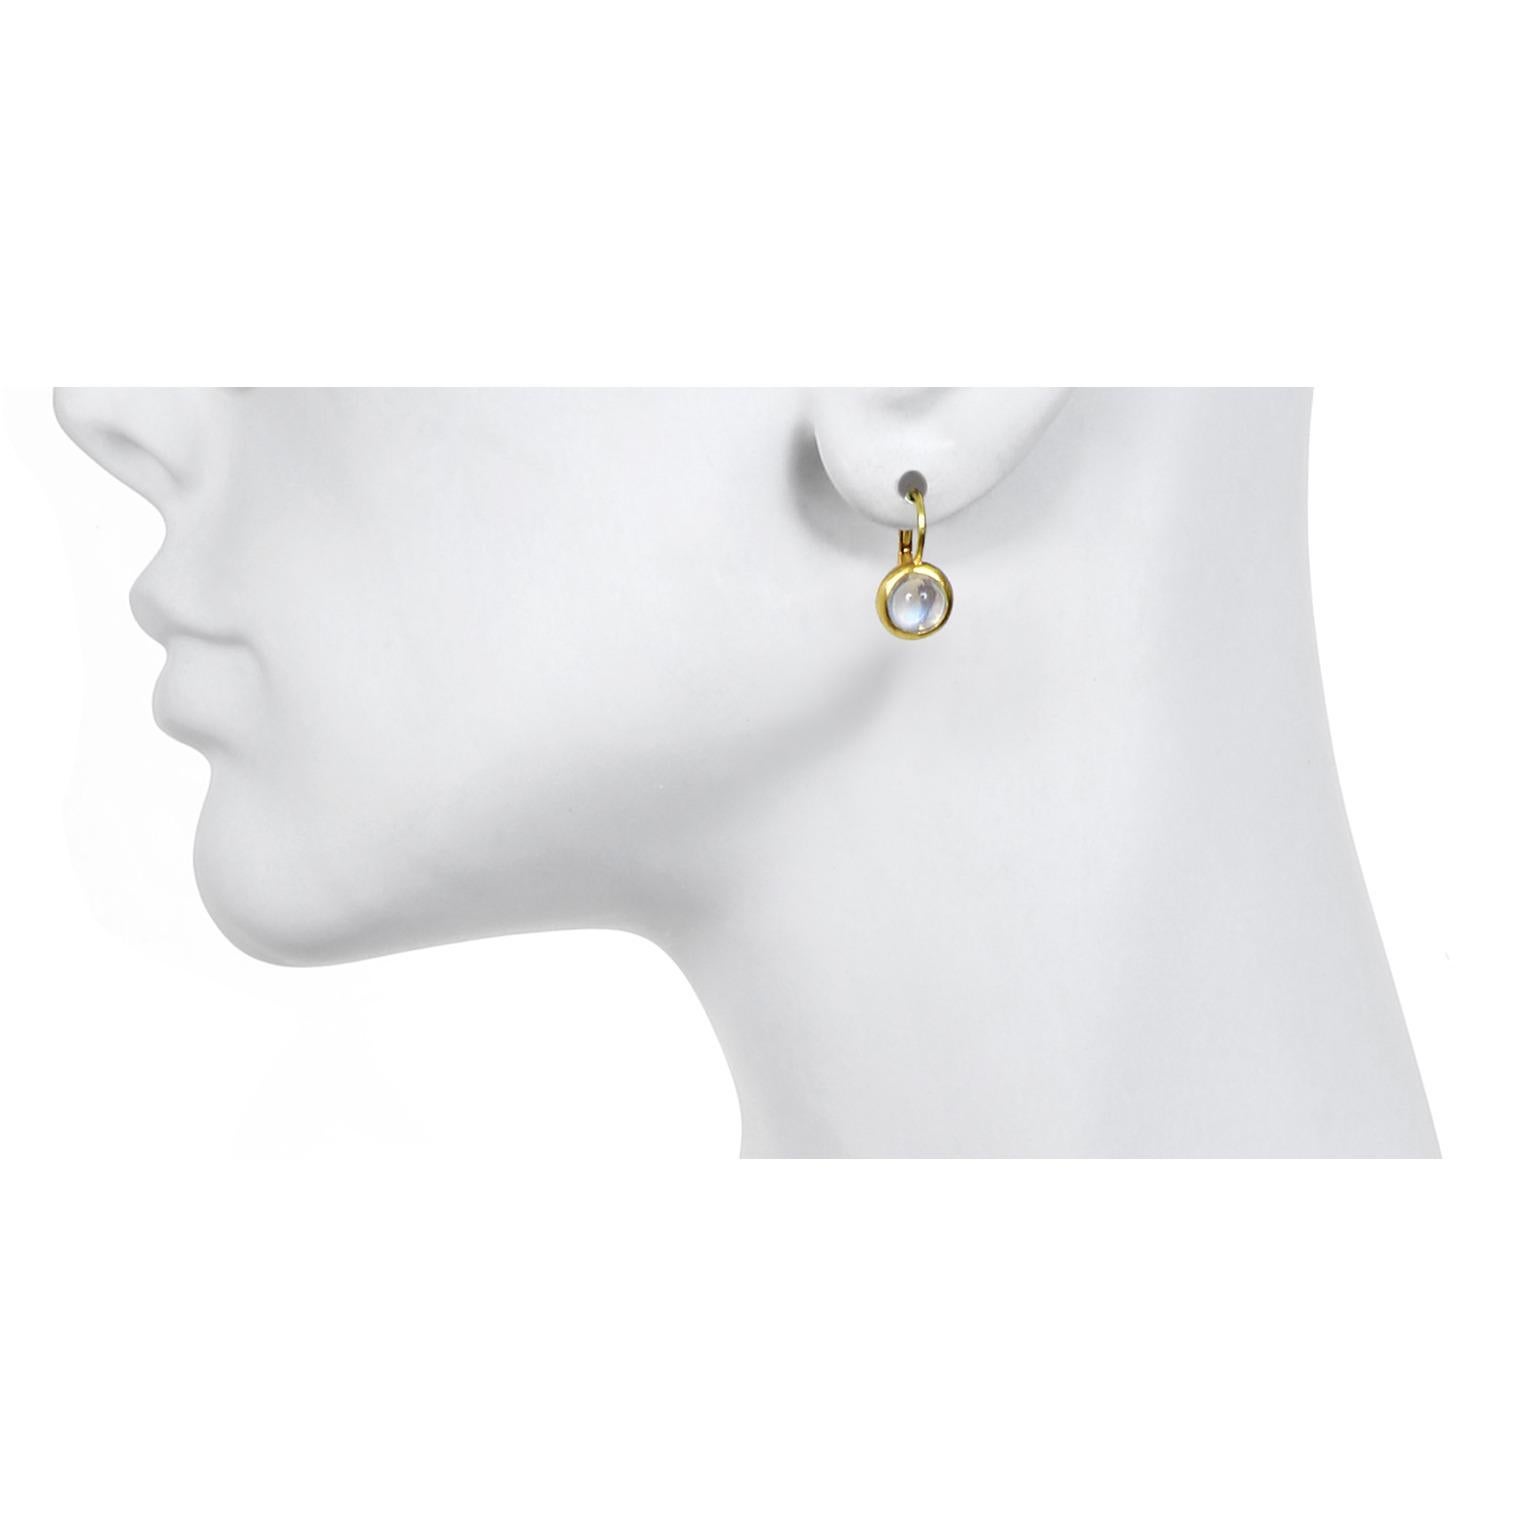 Faye Kim Platinum Diamond Dome Leverback Earrings In New Condition For Sale In Westport, CT